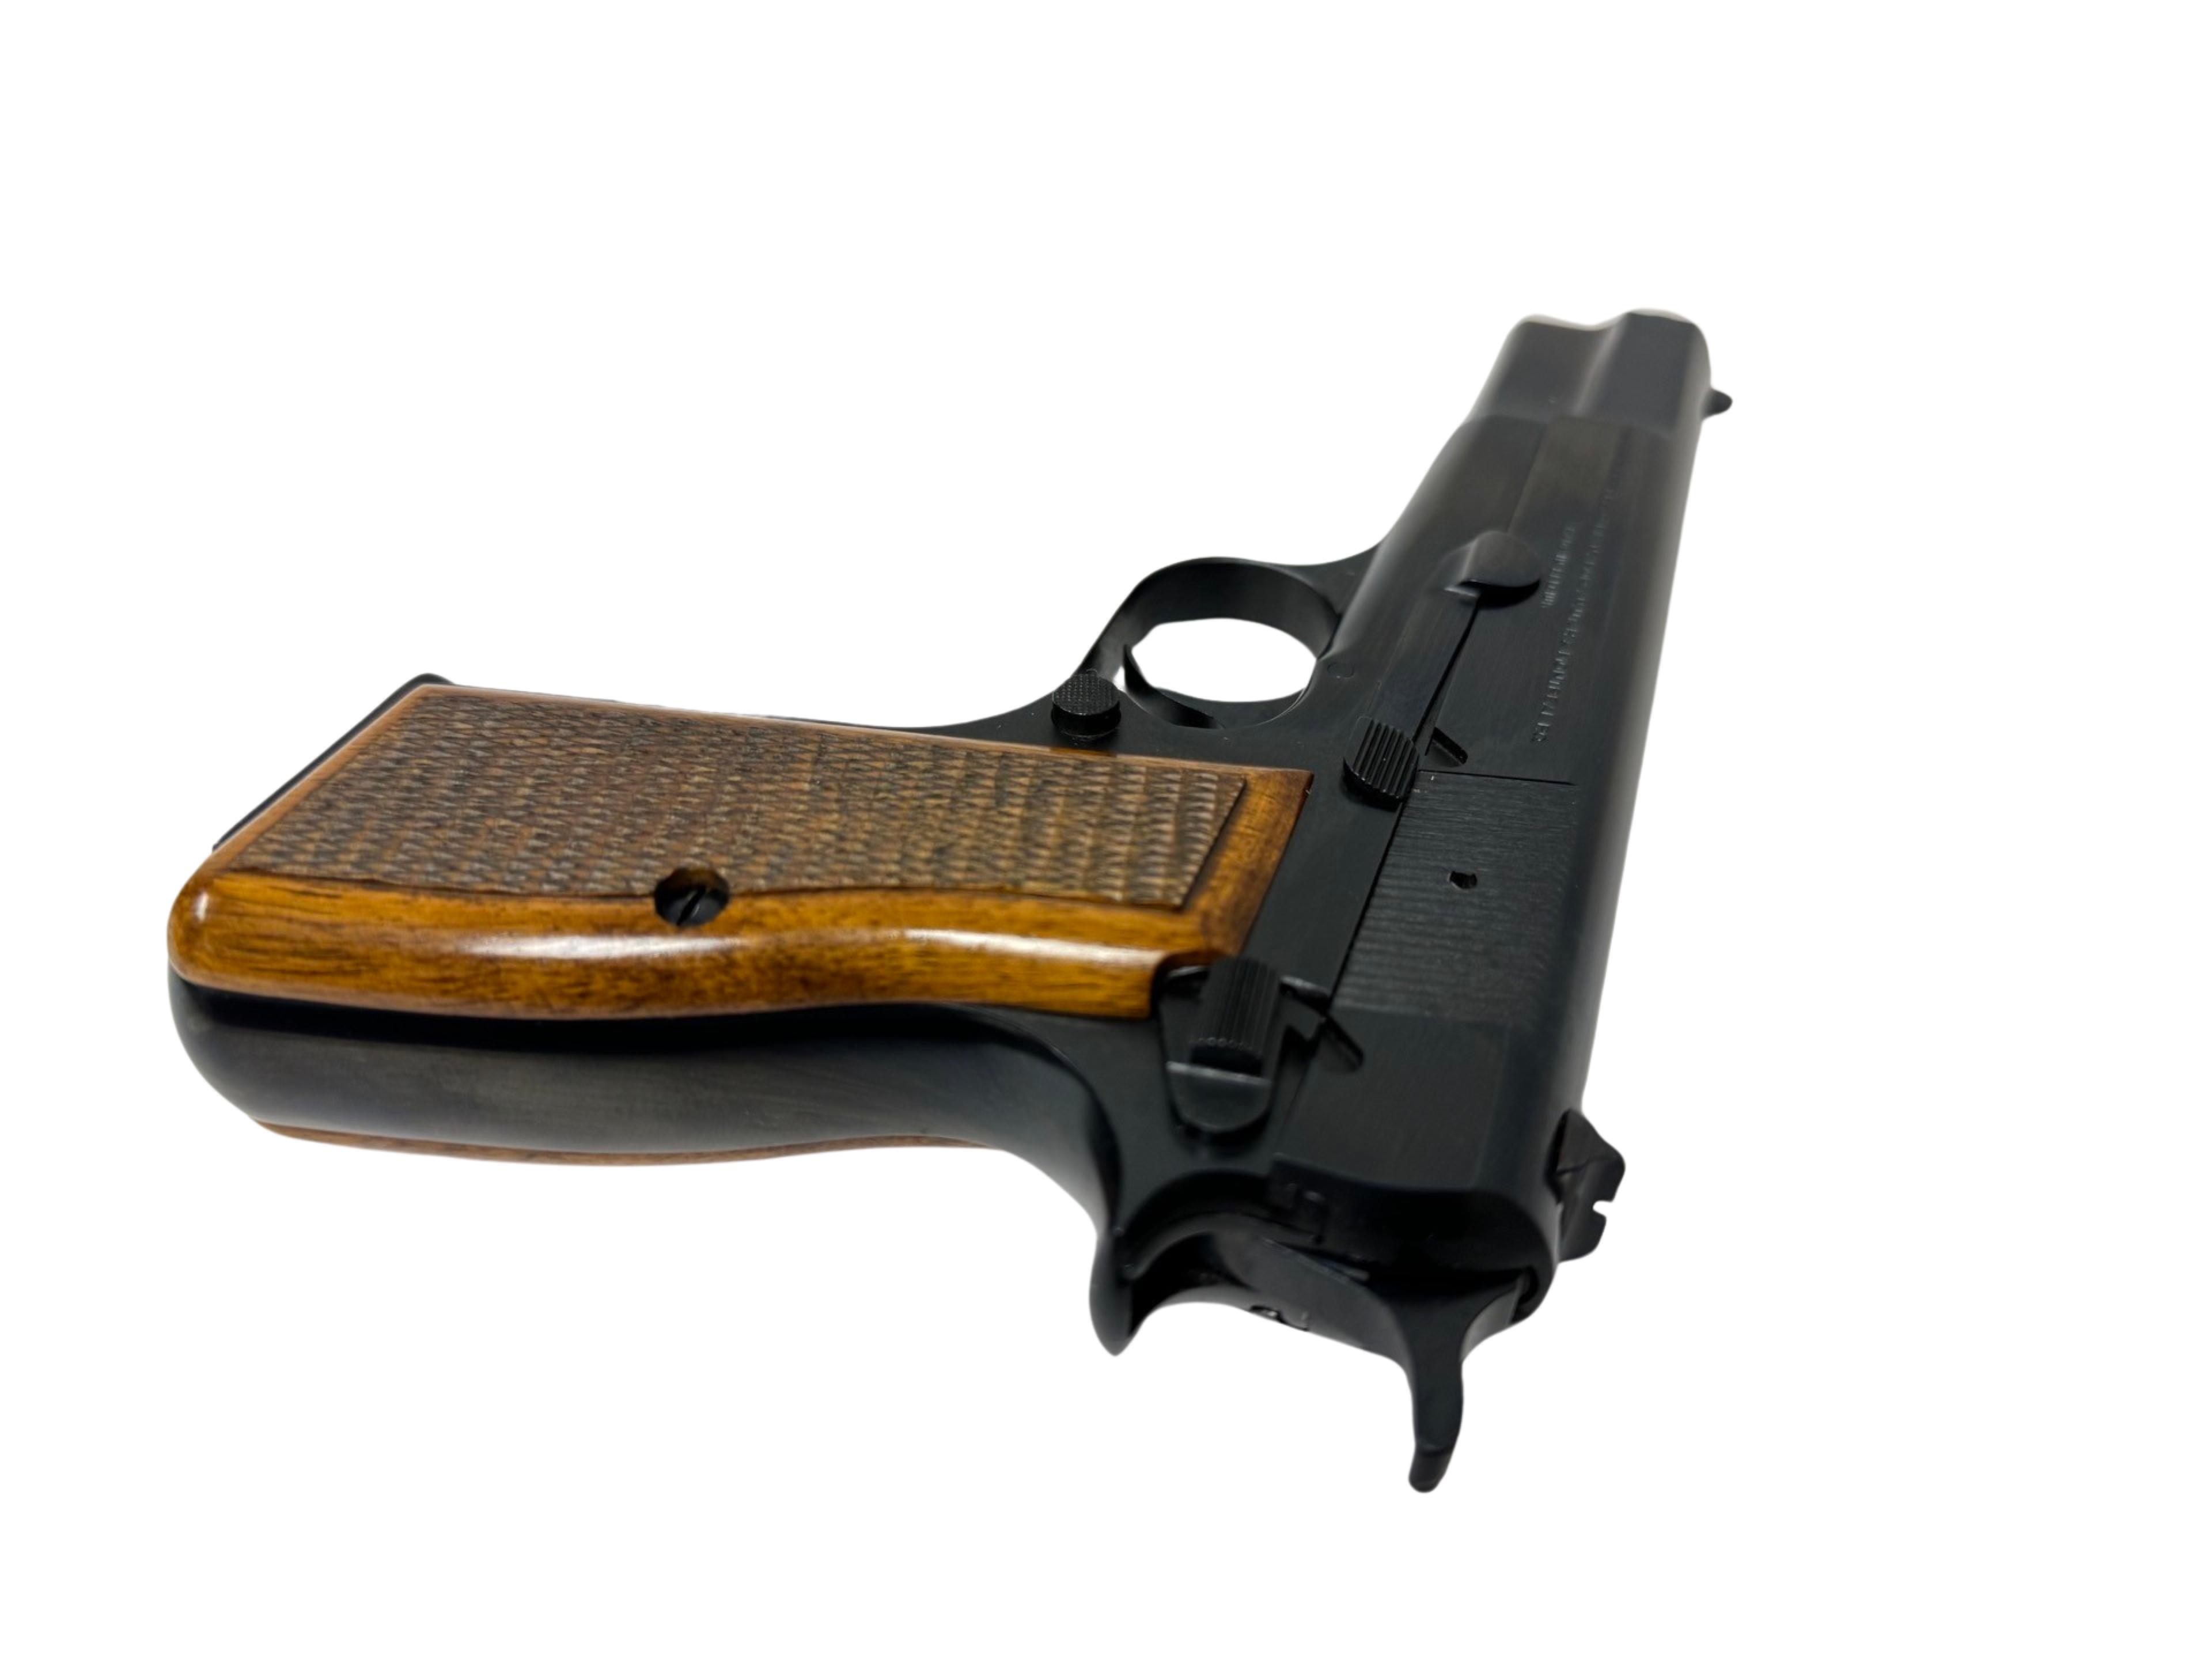 New 1977 Belgium FN Browning Hi Power 9MM Semi-Automatic Pistol in Factory Soft Case